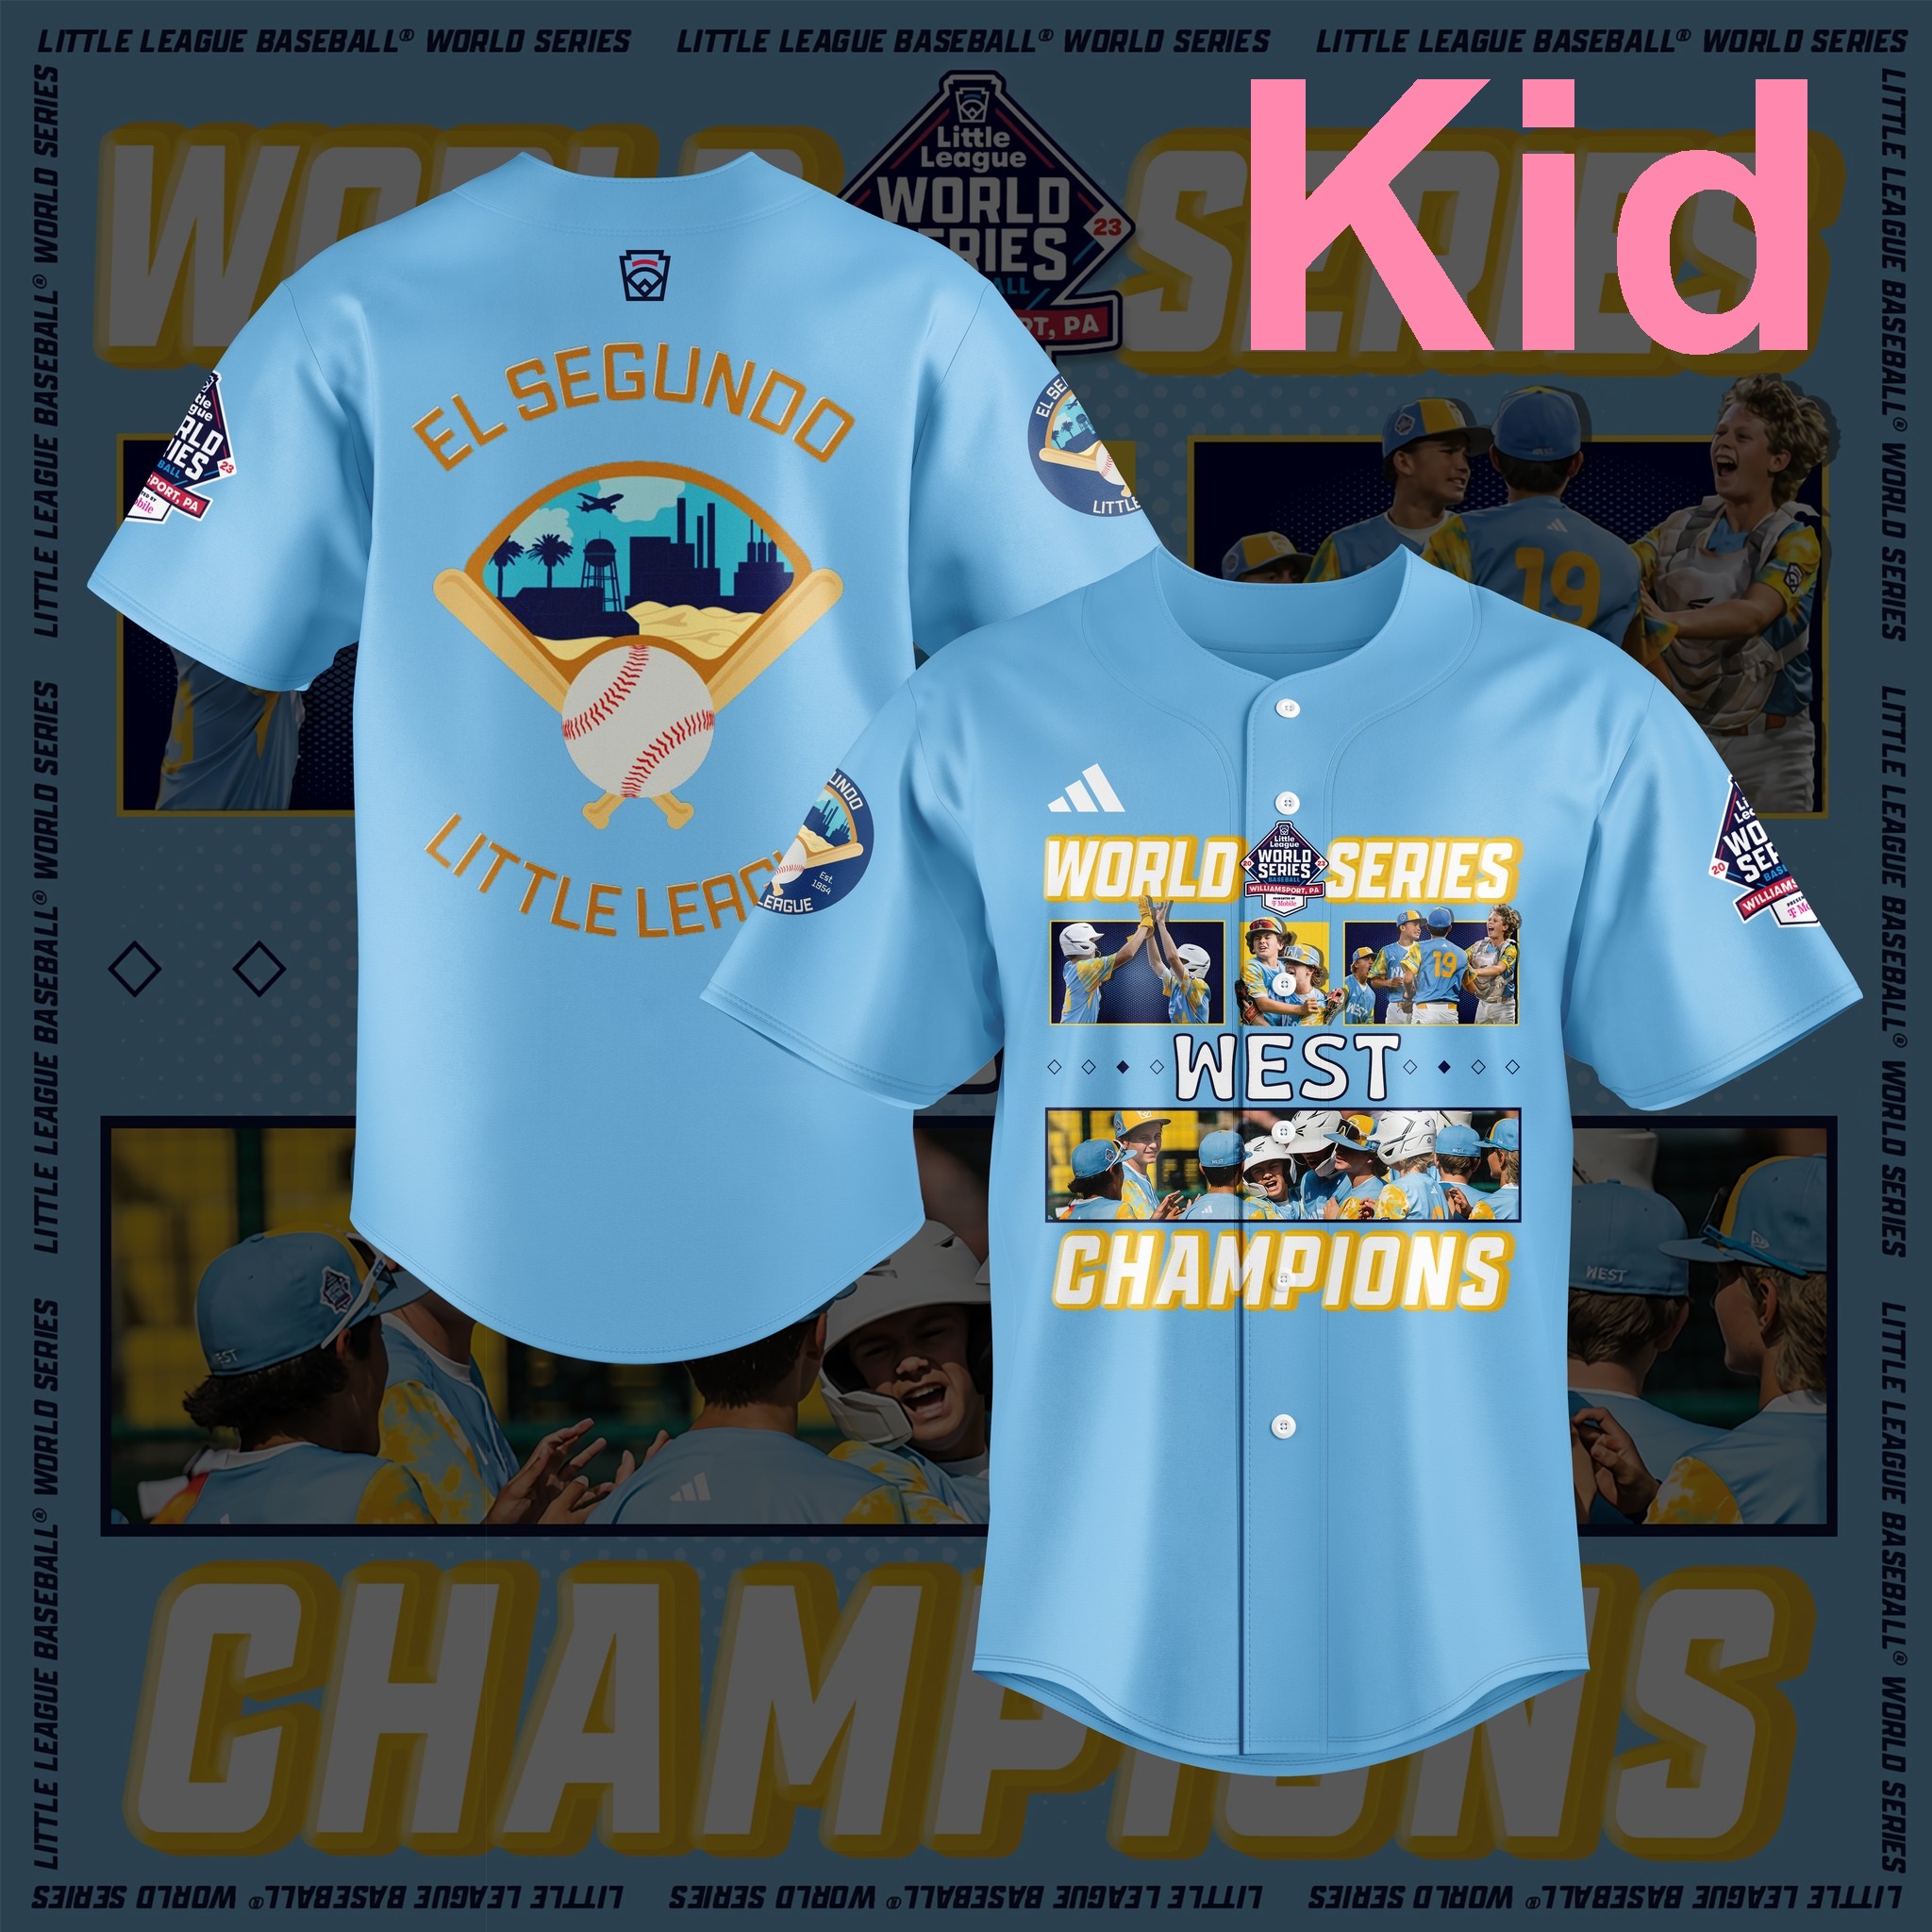 llws jerseys for sale